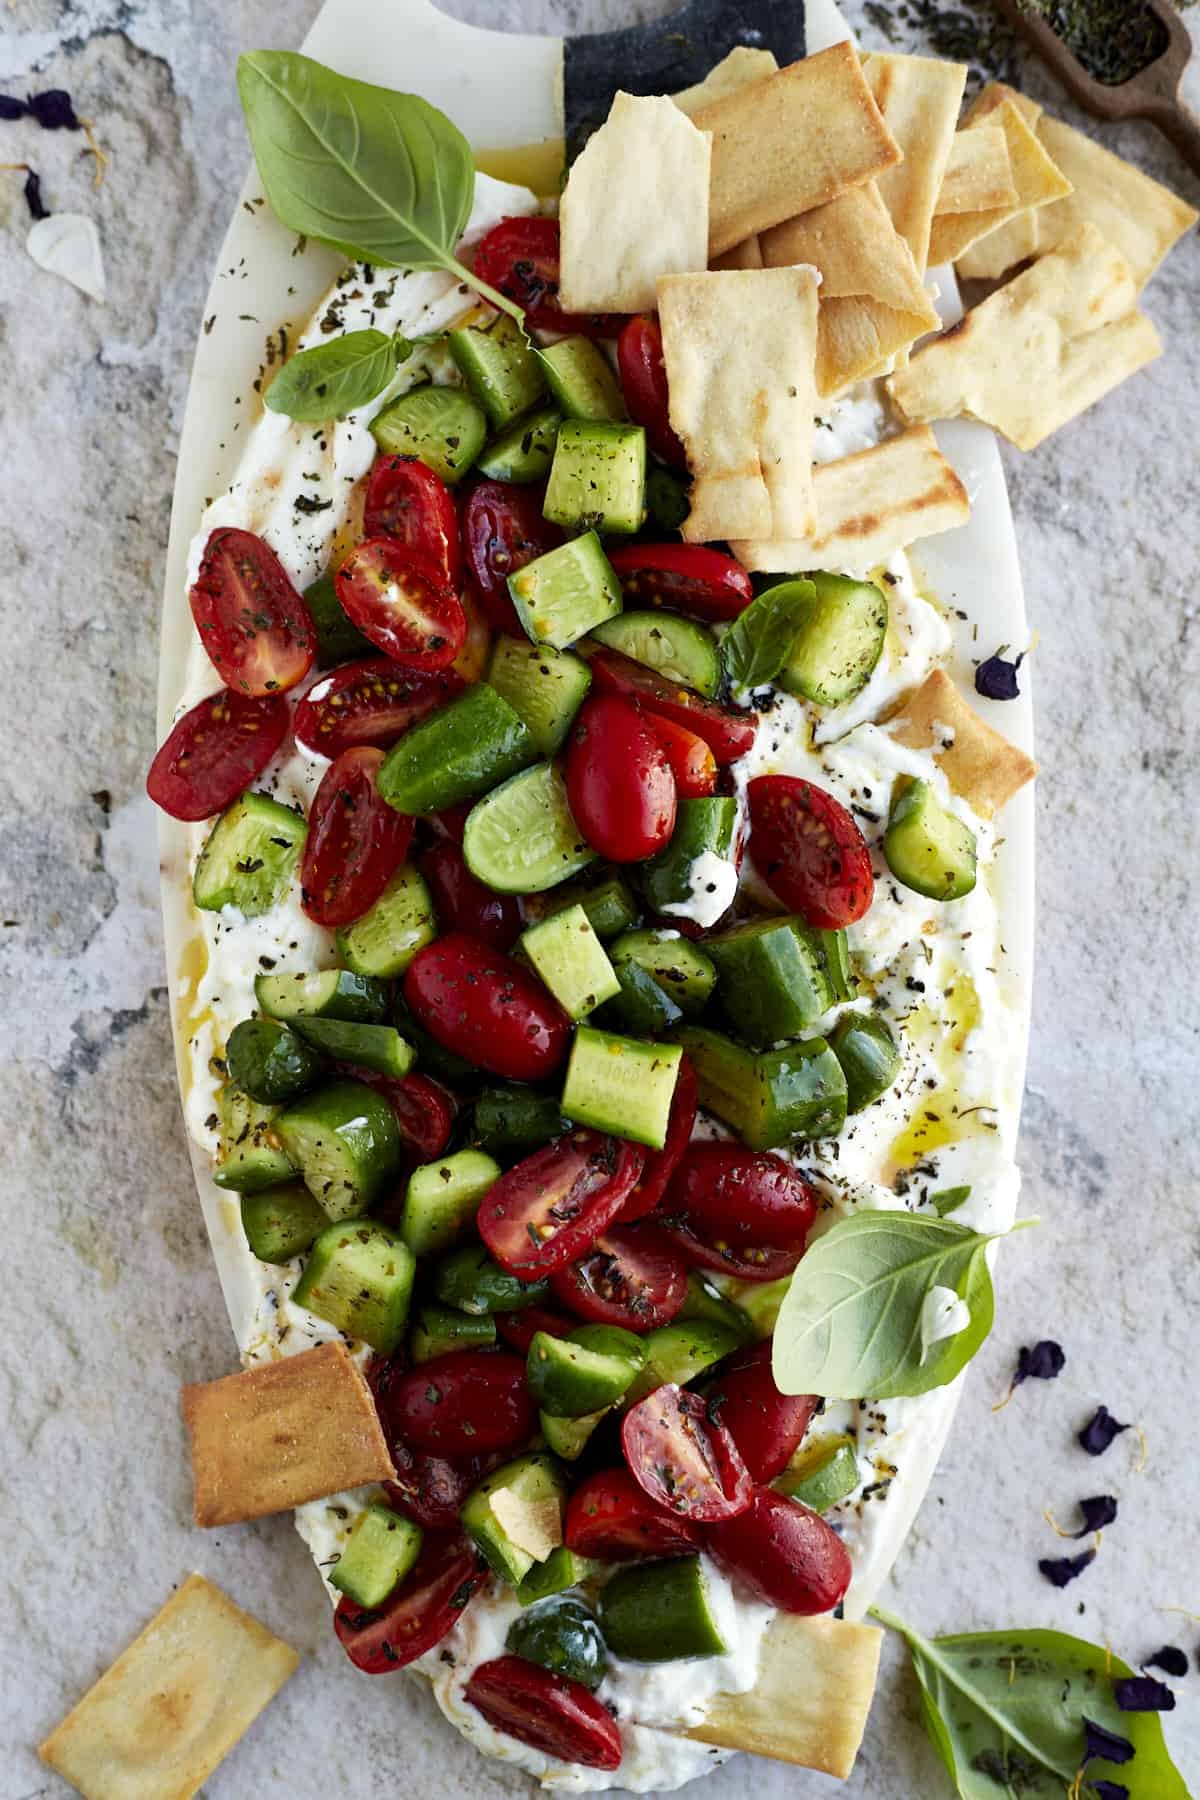 Whipped feta with Tomato and Cucumber Salad